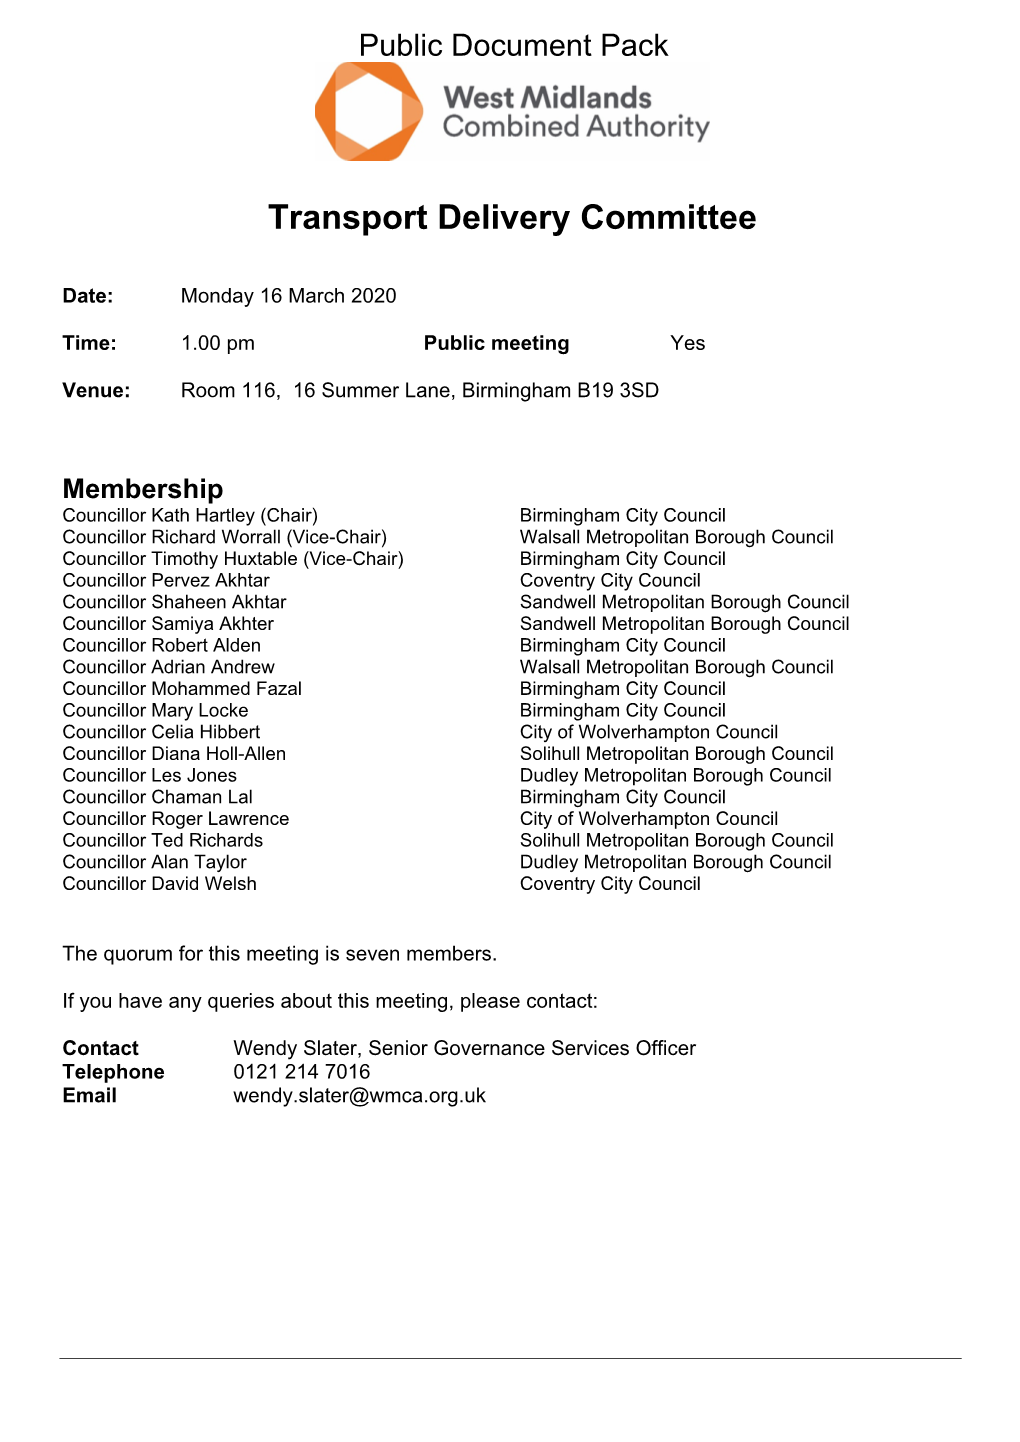 (Public Pack)Agenda Document for Transport Delivery Committee, 16